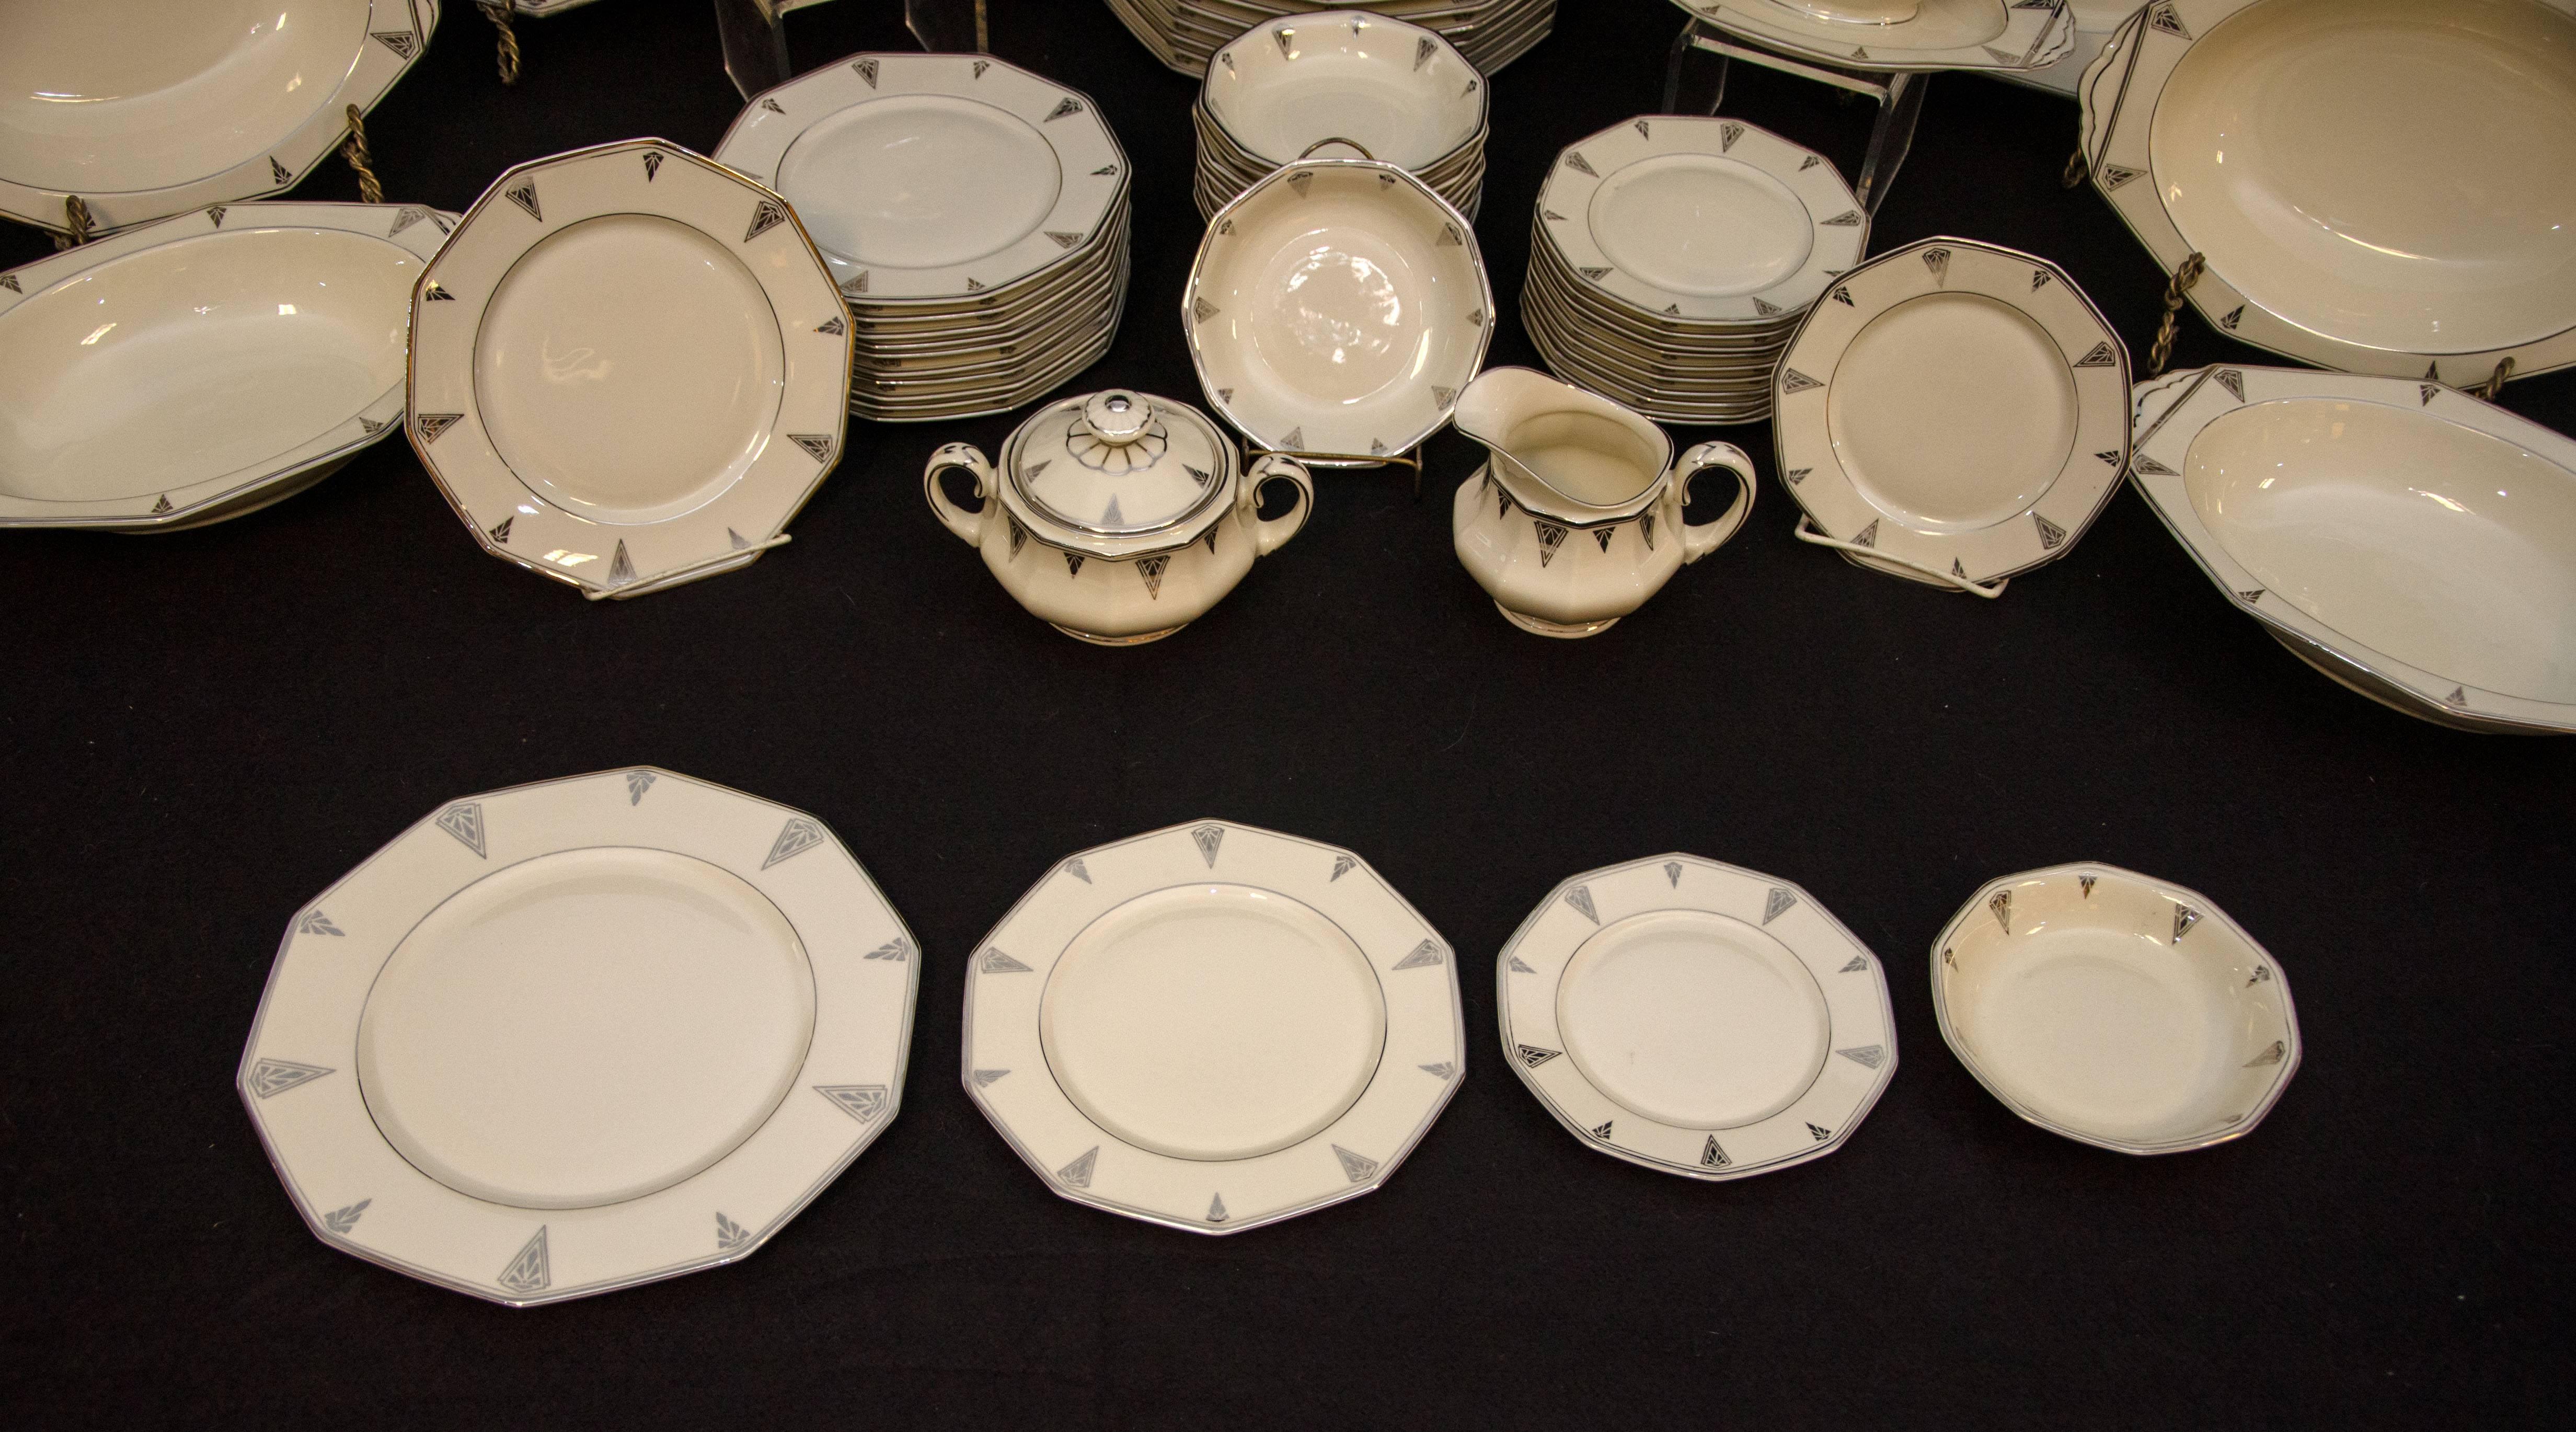 Hard to find large set of Art Deco Bavarian Community china in the Deauville pattern, a cream color with a silver accent pattern. The previous owner initially received part of this set as a wedding gift and added other pieces to the collection for a